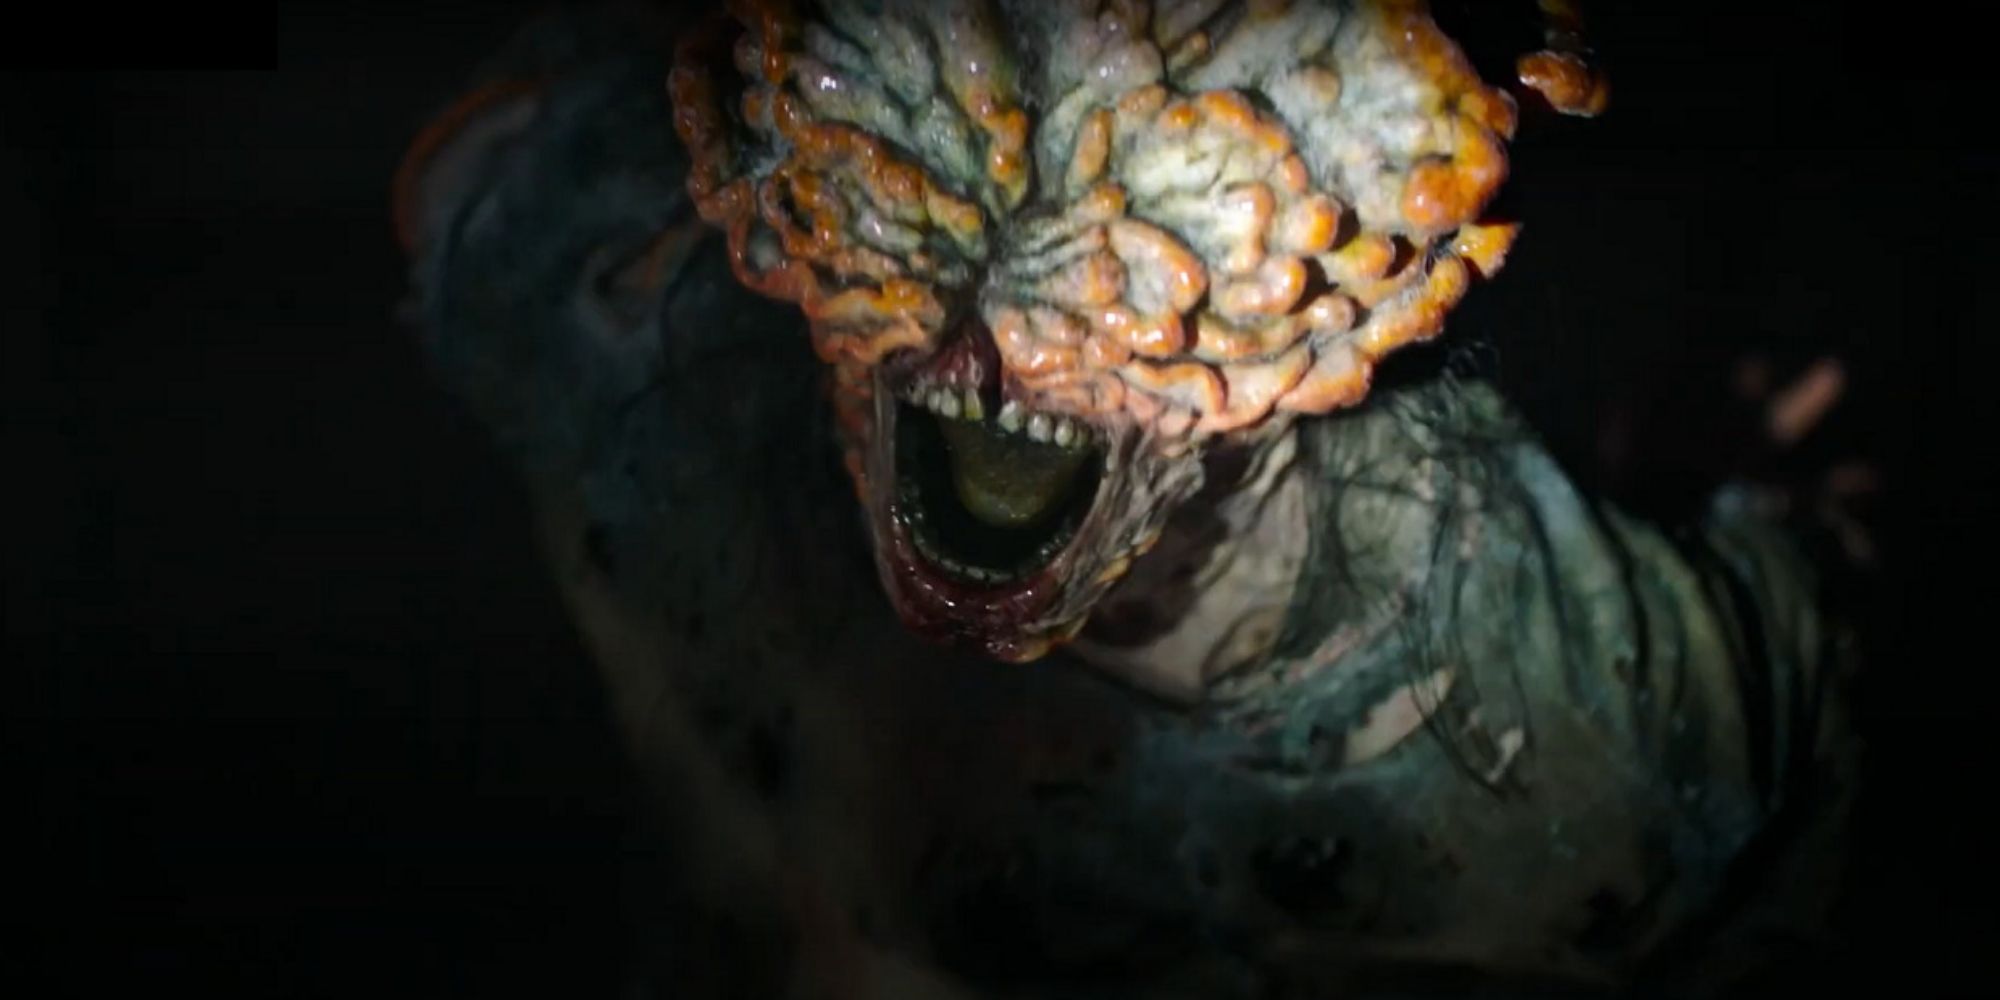 A close-up of the clicker from the HBO series The Last of Us